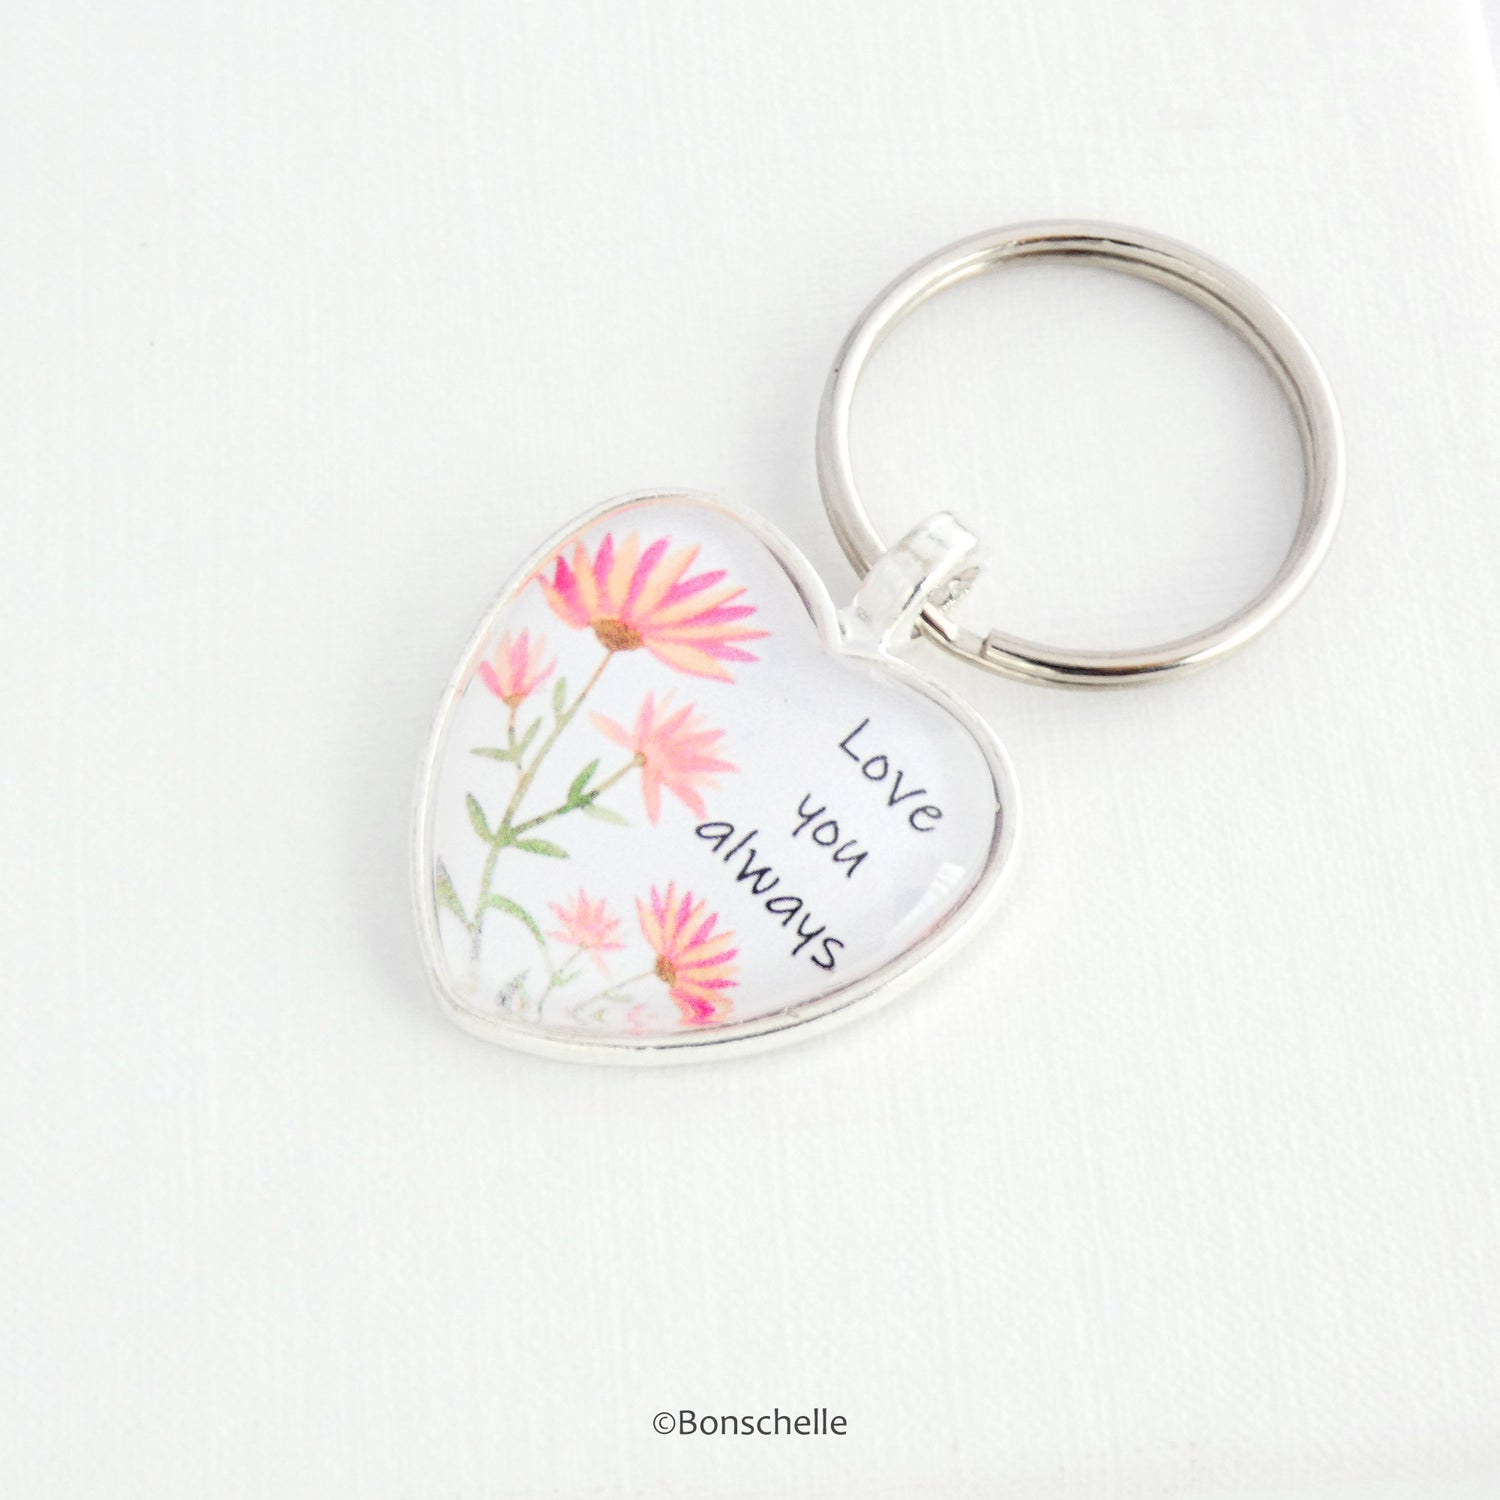 bonschelle gifts and accessories category showing a love heart keyring